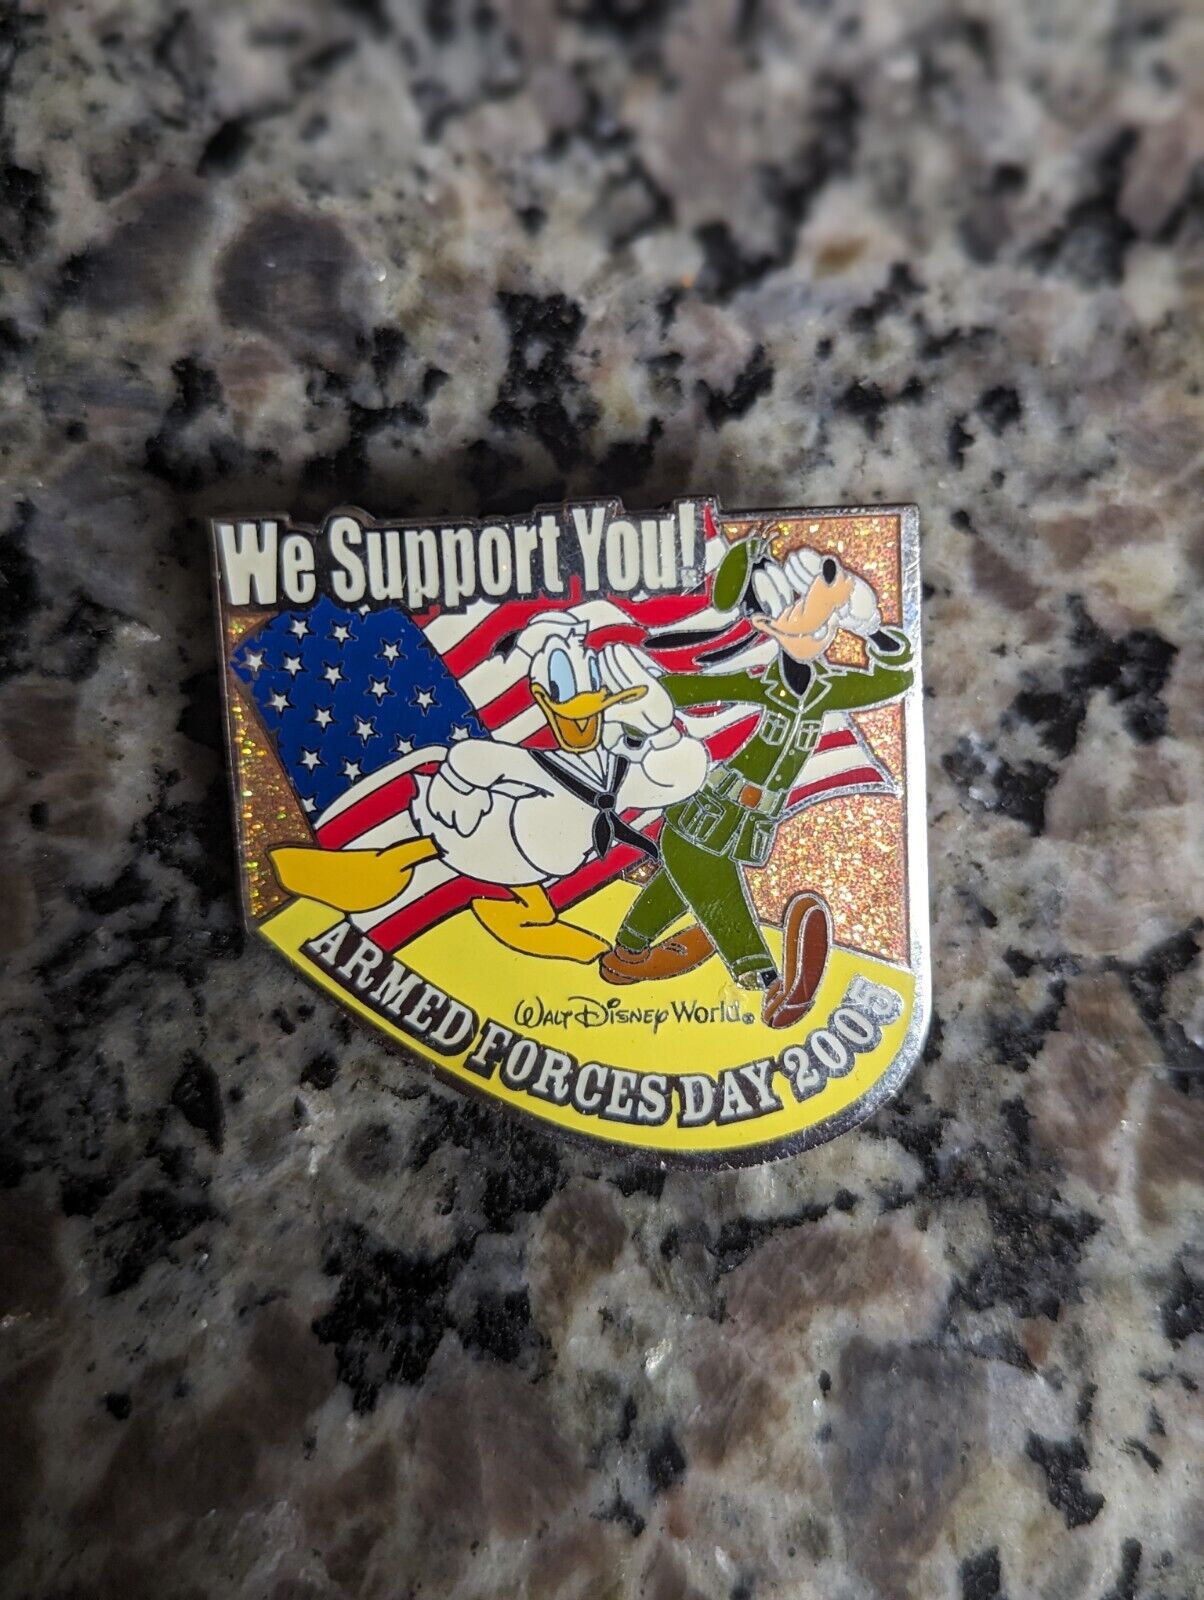 Donald Duck & Goofy Armed Forces Day 2005 We Support You LE OC Pin # 38750